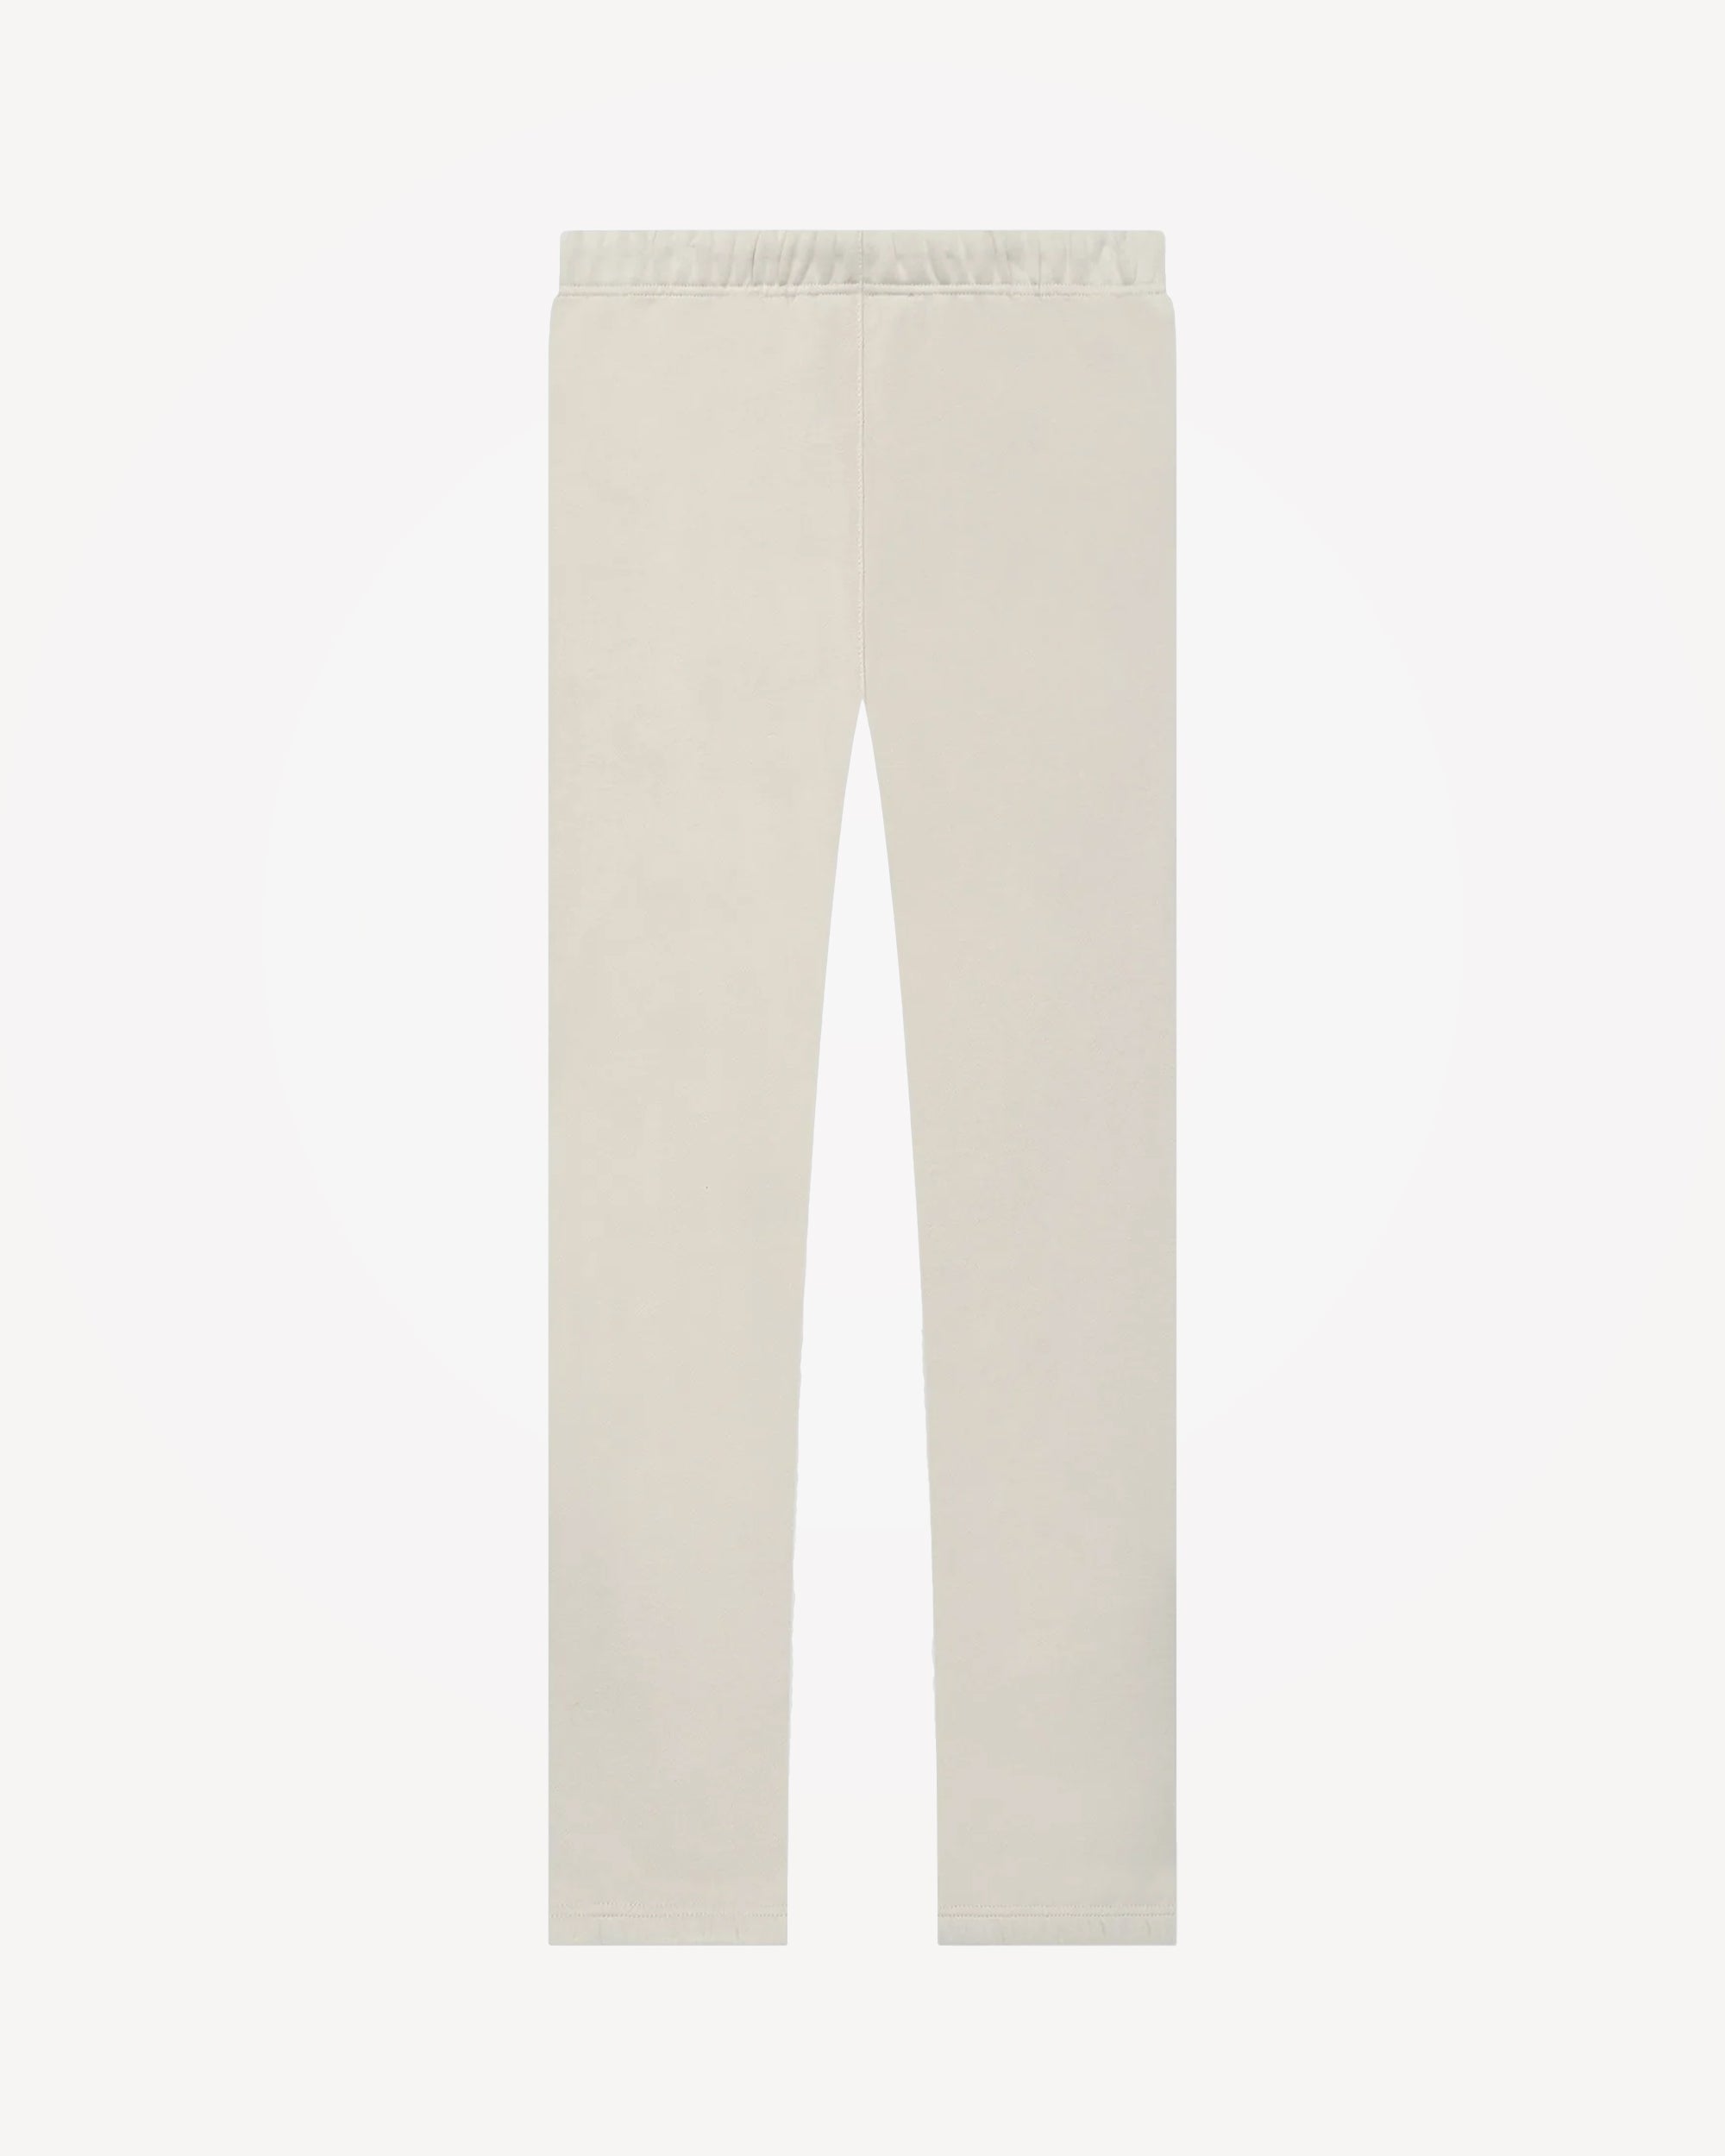 Men's Relaxed Sweatpants in Wheat